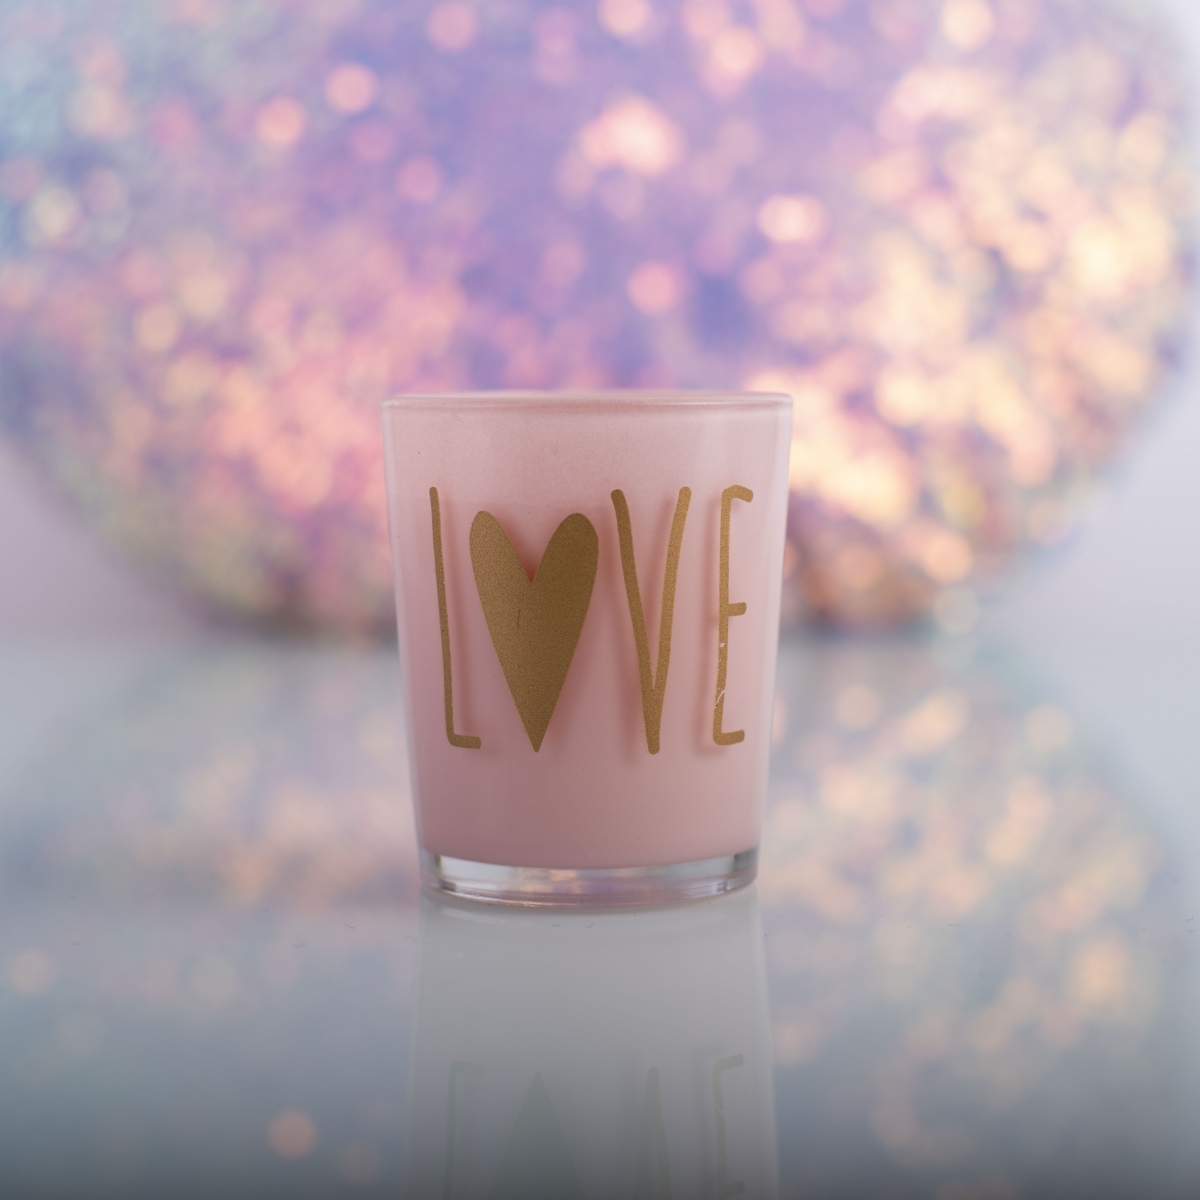 Valentine Day Candles : Sexy Love , Pink Candle Jar , Romantic Romance ,China Factory , Good Price-HOWCANDLE-Candles,Scented Candles,Aromatherapy Candles,Soy Candles,Vegan Candles,Jar Candles,Pillar Candles,Candle Gift Sets,Essential Oils,Reed Diffuser,Candle Holder,